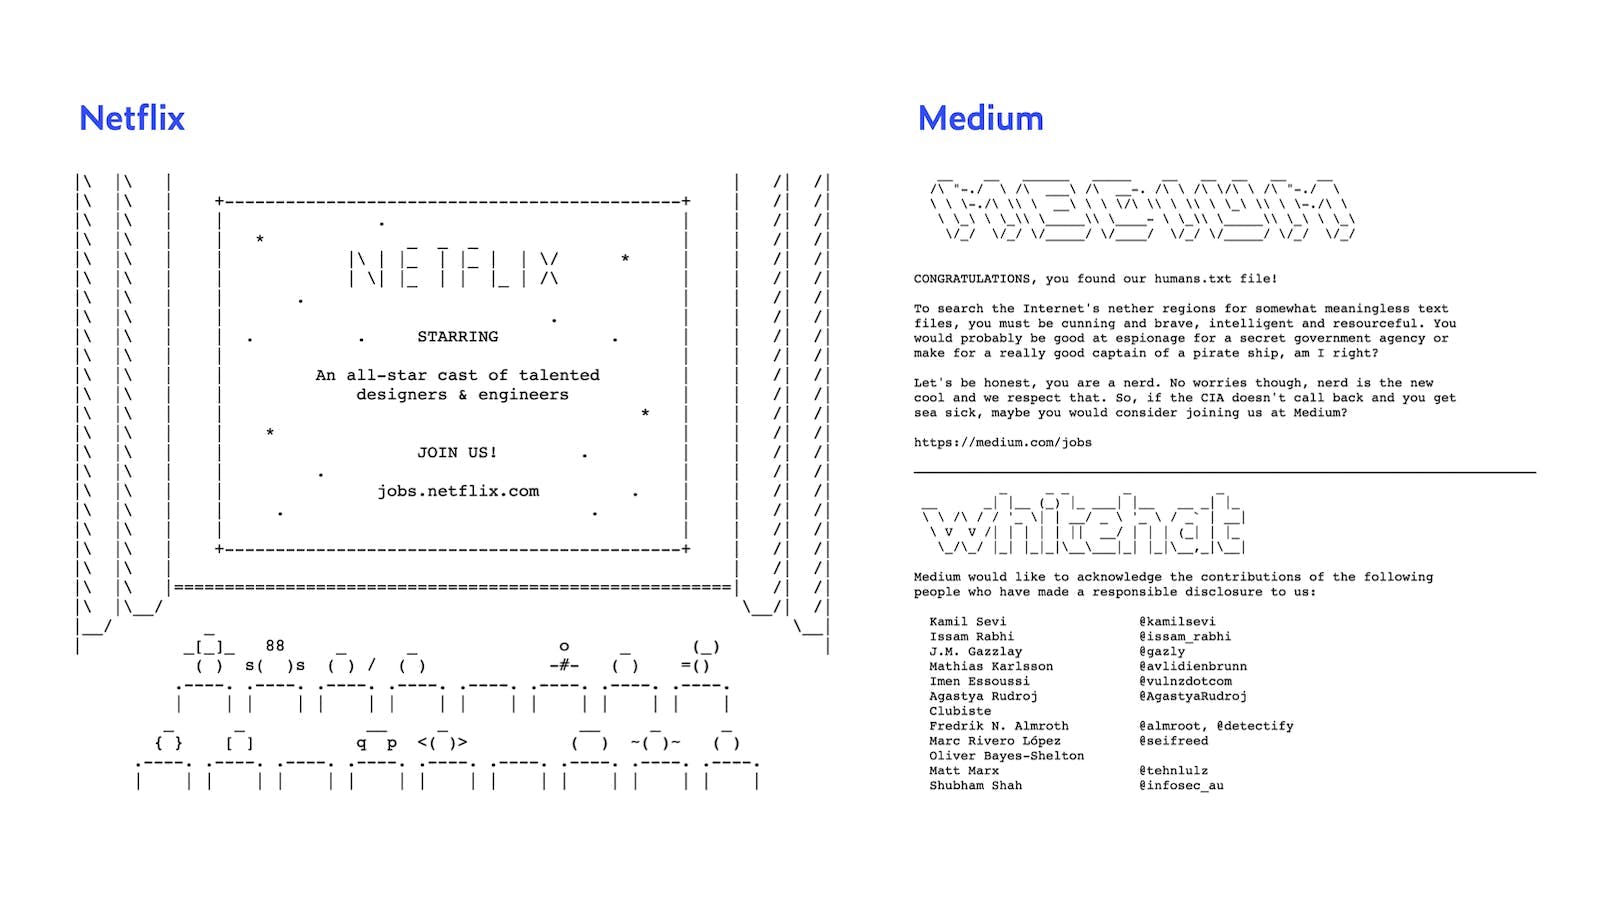 ACSII art humans.txt examples for the websites Netflix, showing people in a theatre, Medium, with a stylized logo and some credits, also to Whitehat, showing a stylized logo and credits. (Source: Dataprovider.com)